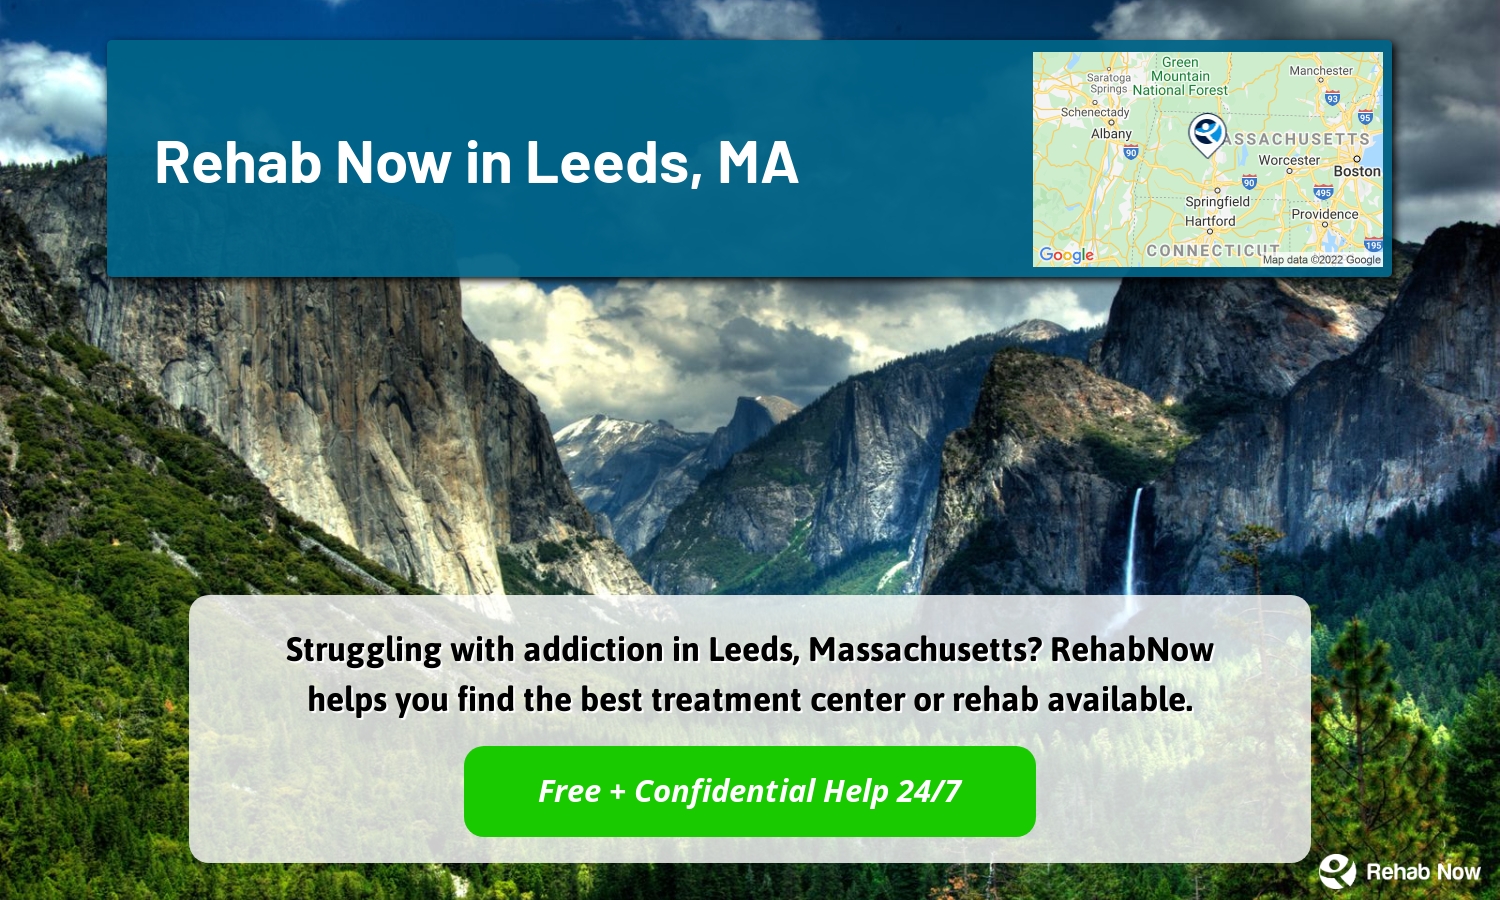 Struggling with addiction in Leeds, Massachusetts? RehabNow helps you find the best treatment center or rehab available.